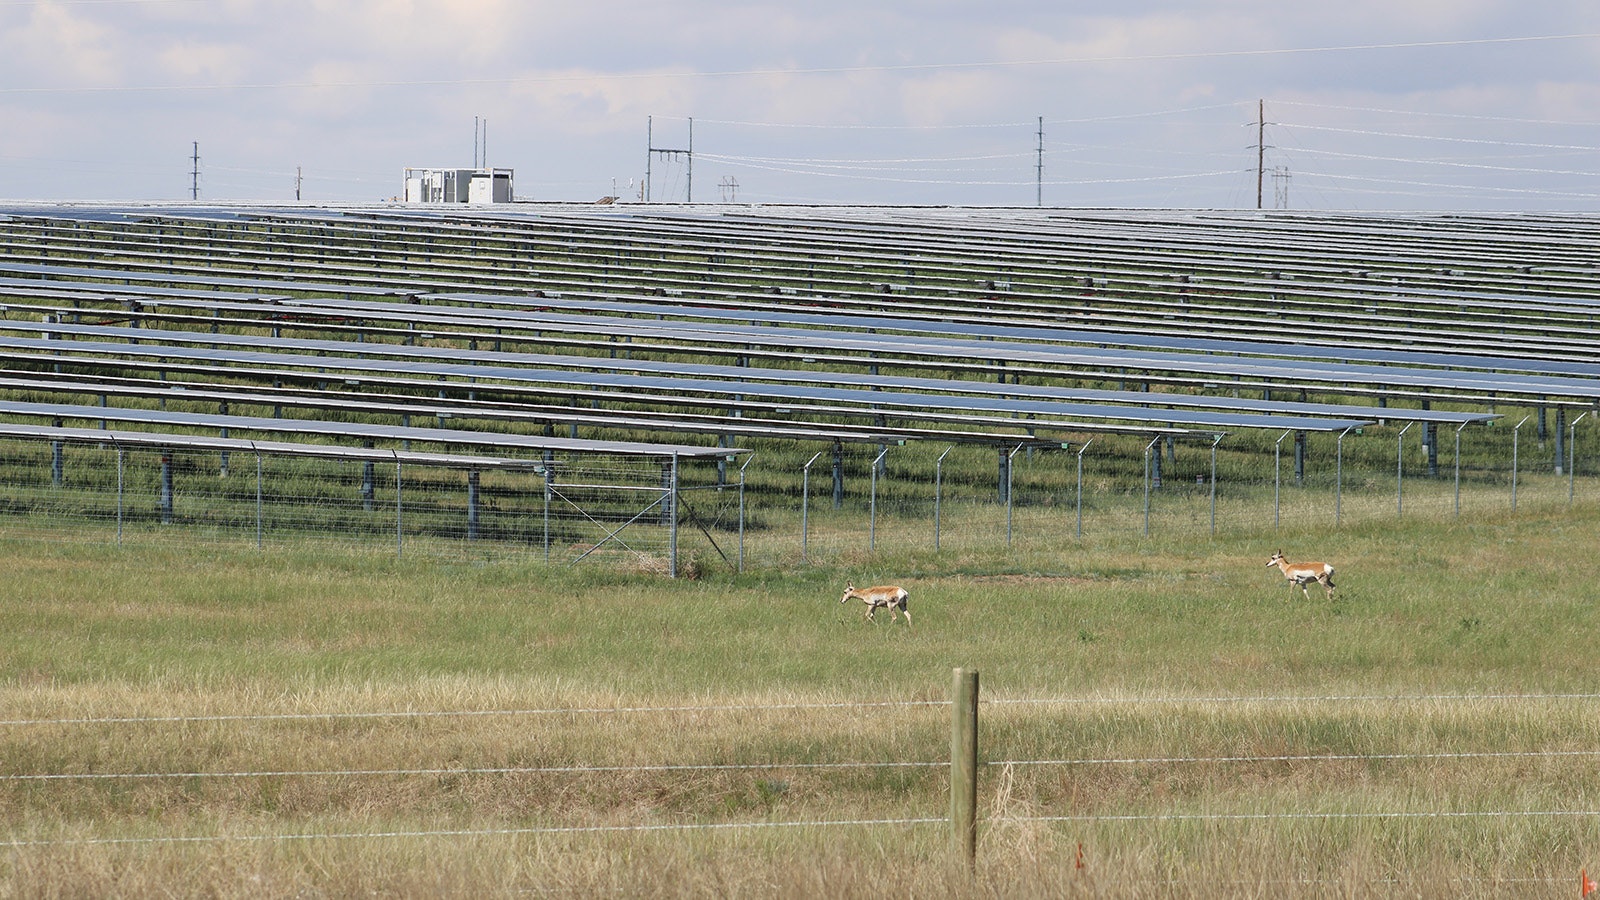 This 150-megawatt solar farm along the South Greeley Highway south of Cheyenne is owned by Atlanta-based Southern Co. and is close to supplying Black Hills Energy with power. It's also in the middle of Wyoming's Hail Alley.